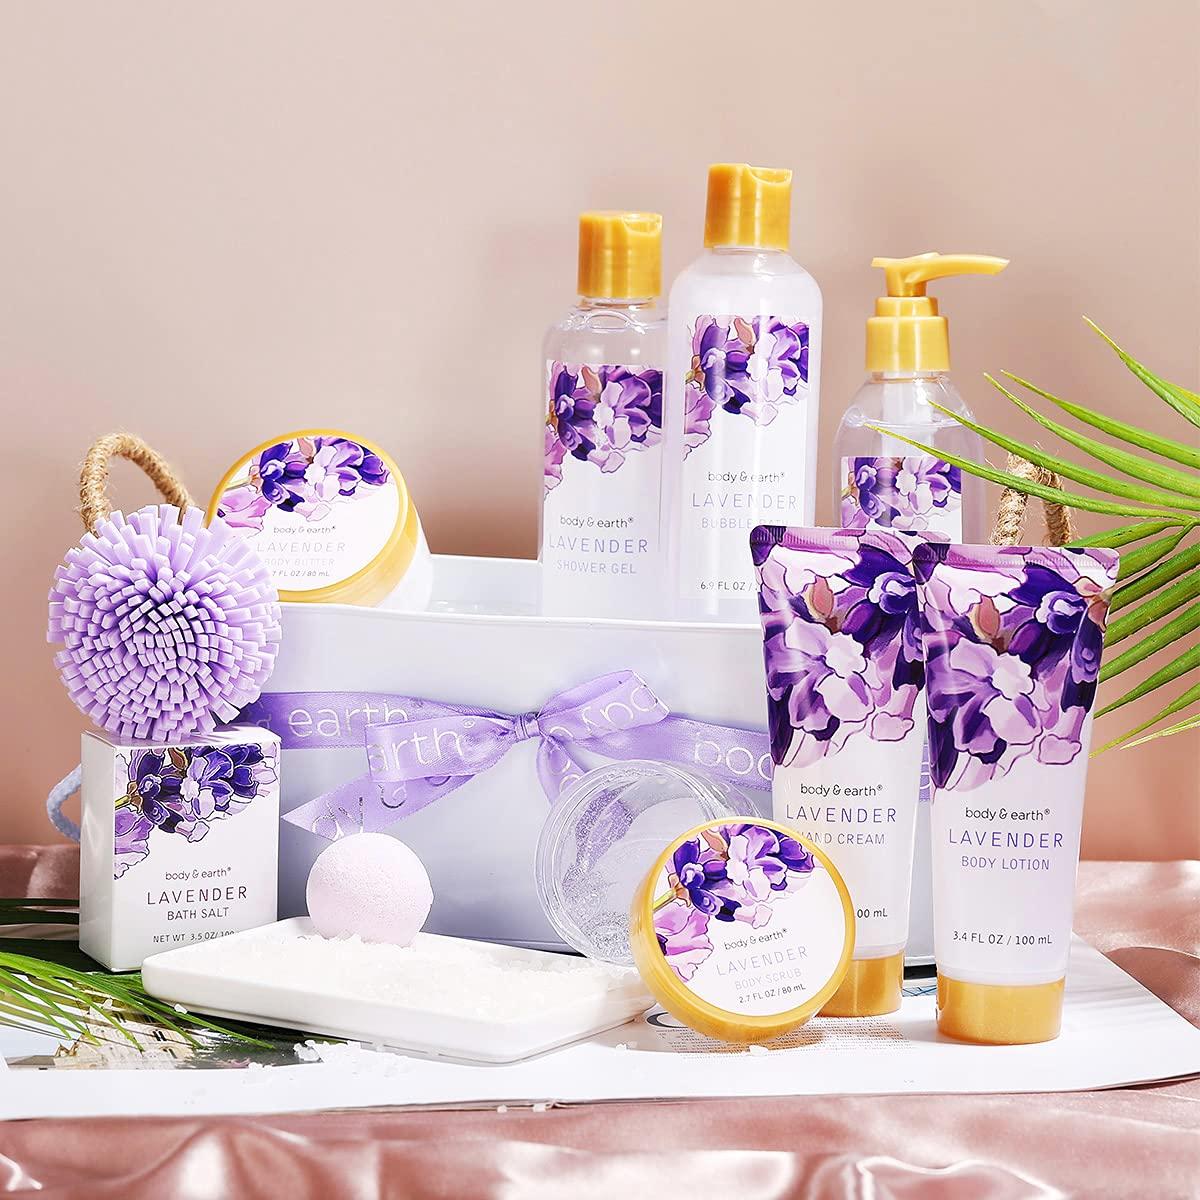 Birthday Gifts for Women Bath and Body Works Gifts Set for Women Spa Gifts Baskets for Women Bubble Bath for Women Lavender Gifts for Women,Mom,Her,S